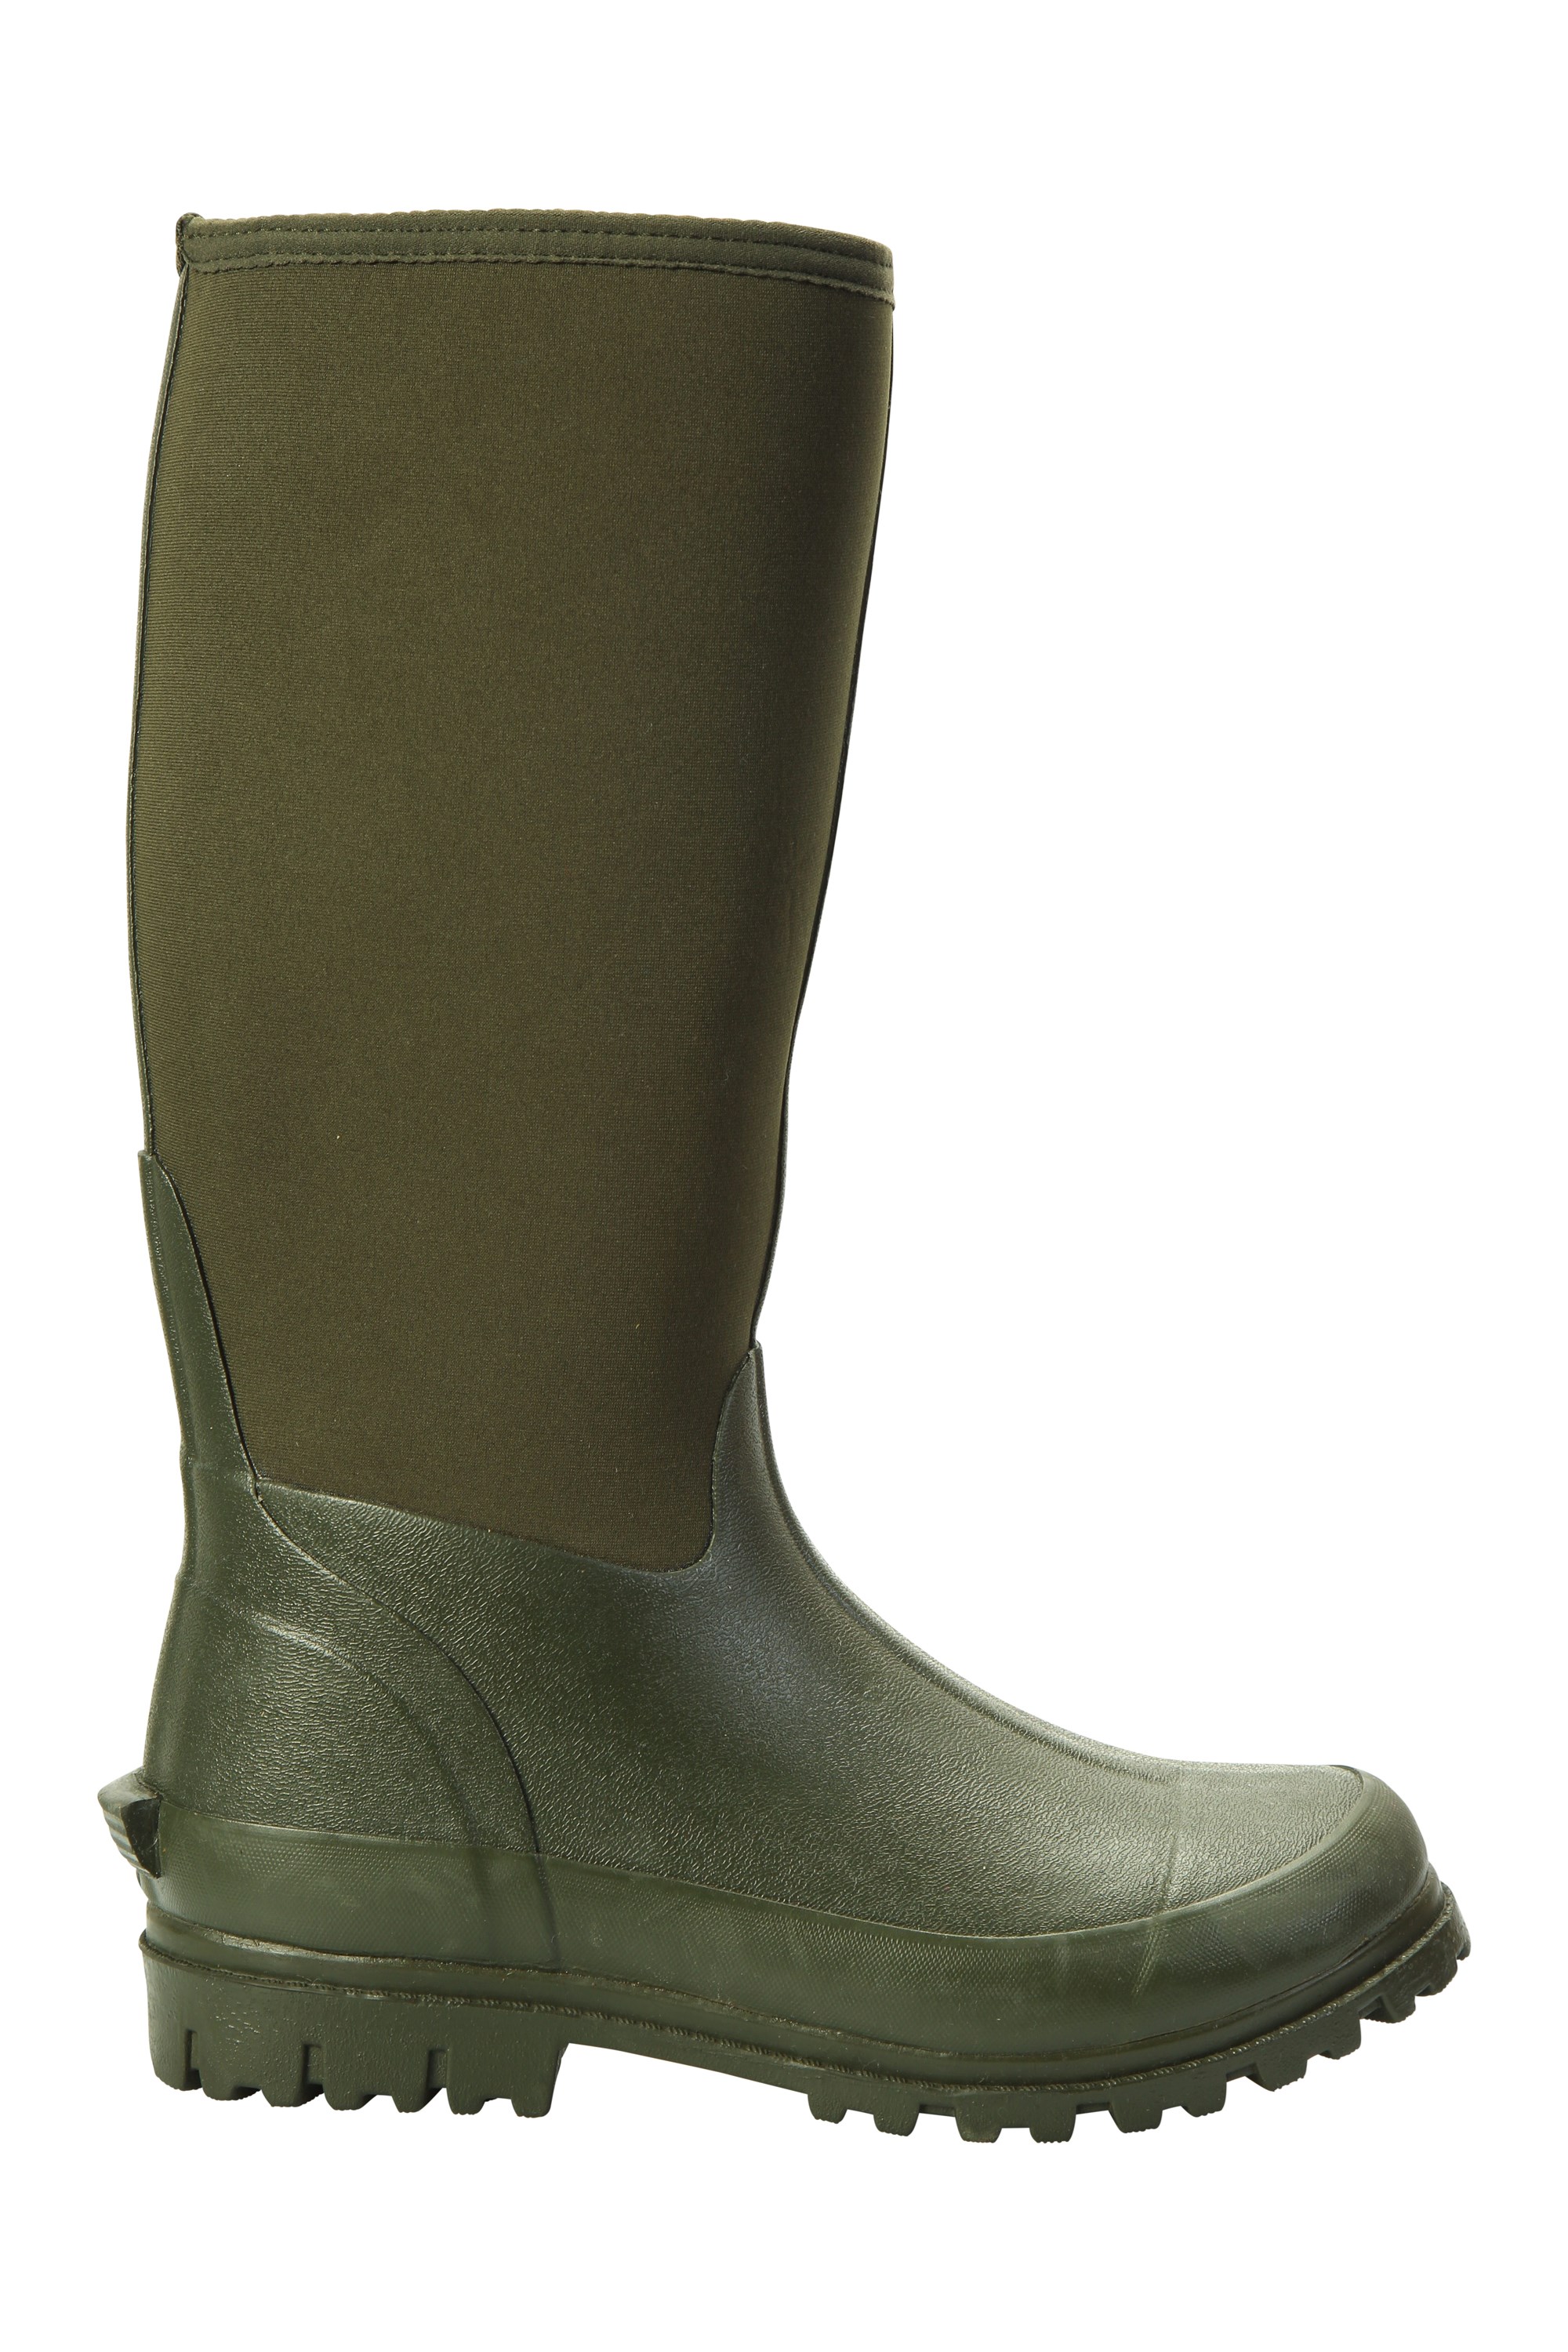 Mountain Warehouse Easy Clean Walking in Khaki 01 for Men Mens Shoes Boots Wellington and rain boots Green 